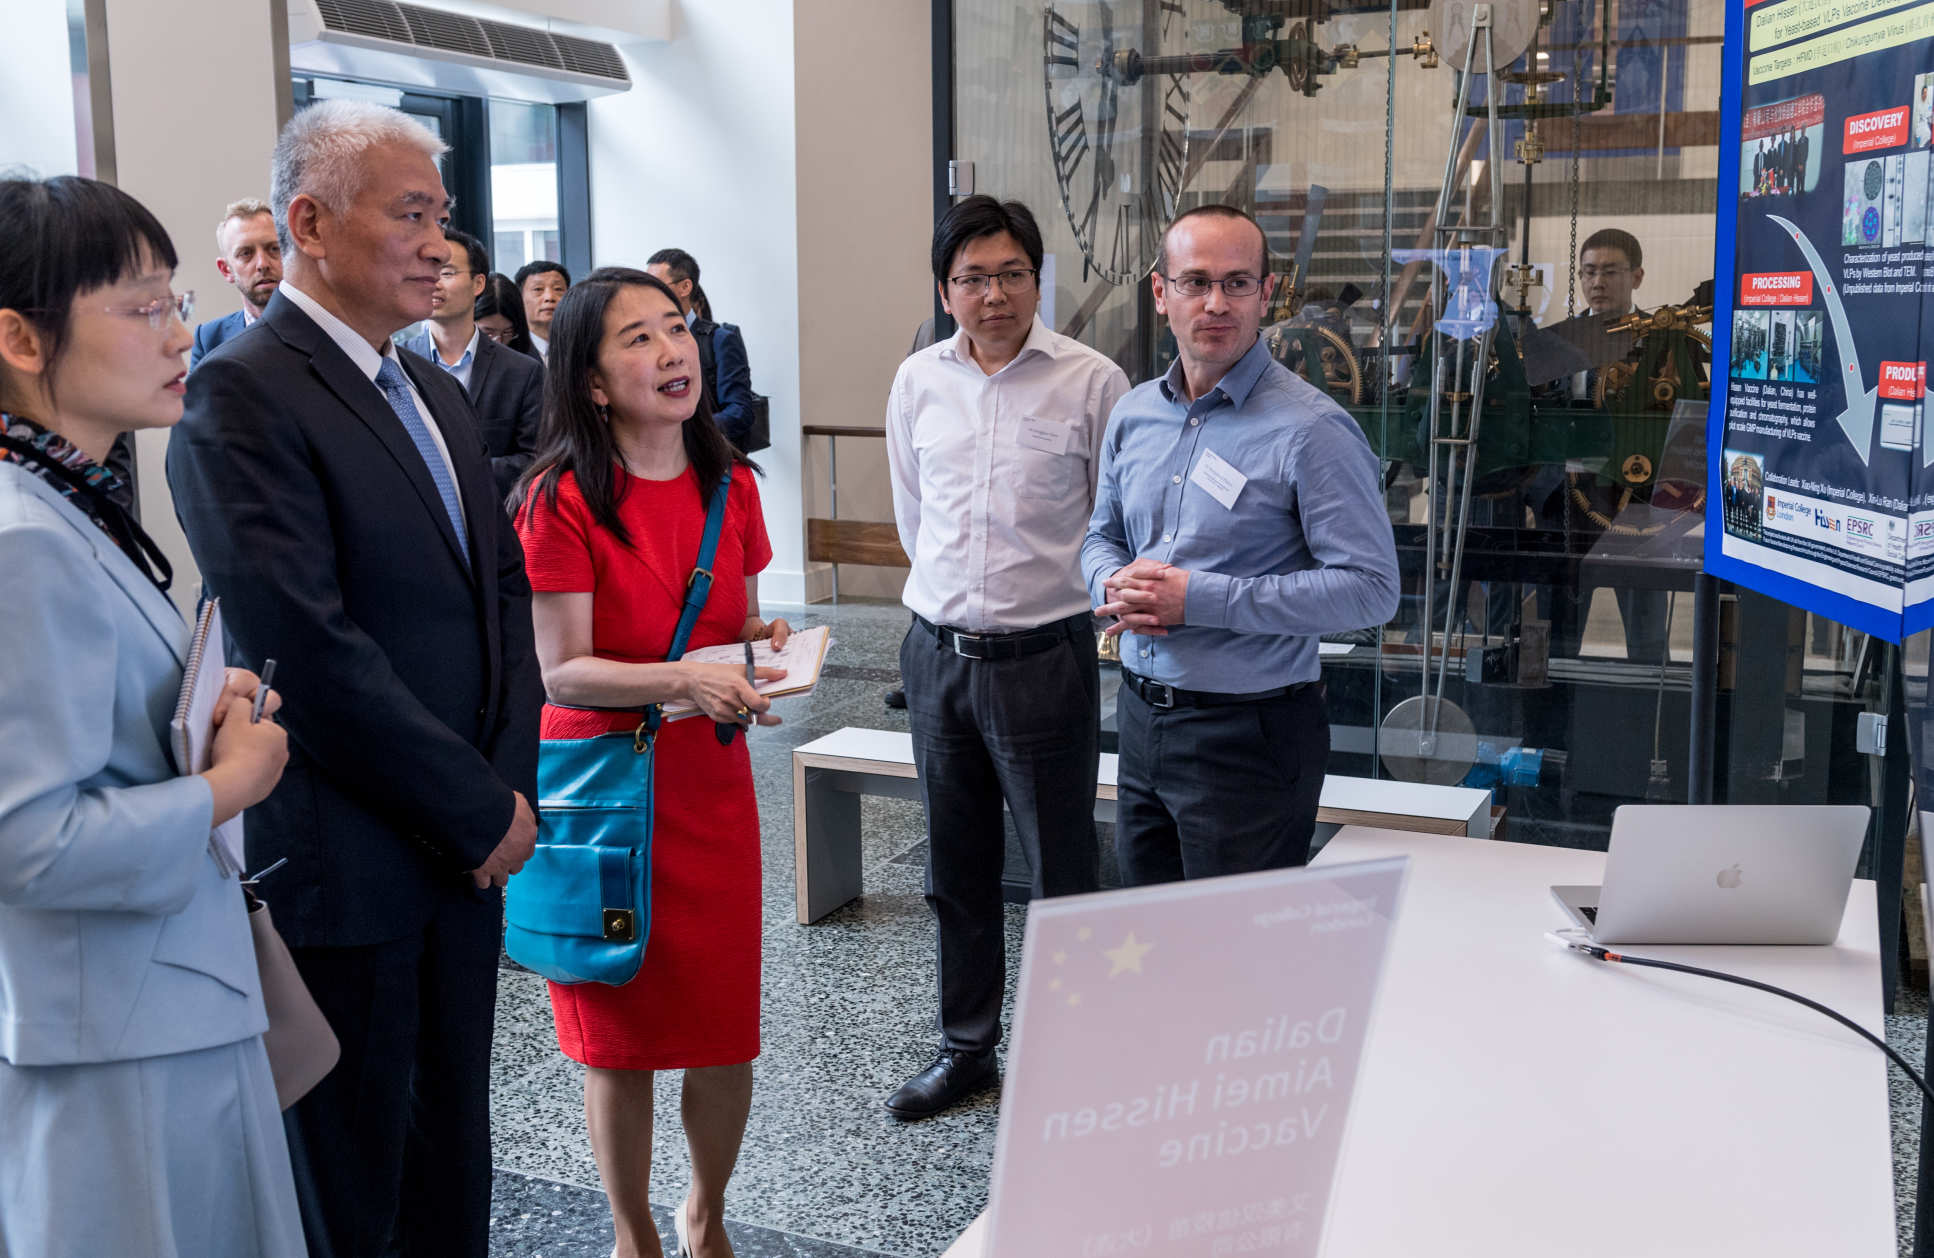 The Minister learned about UK-China vaccine collaborations